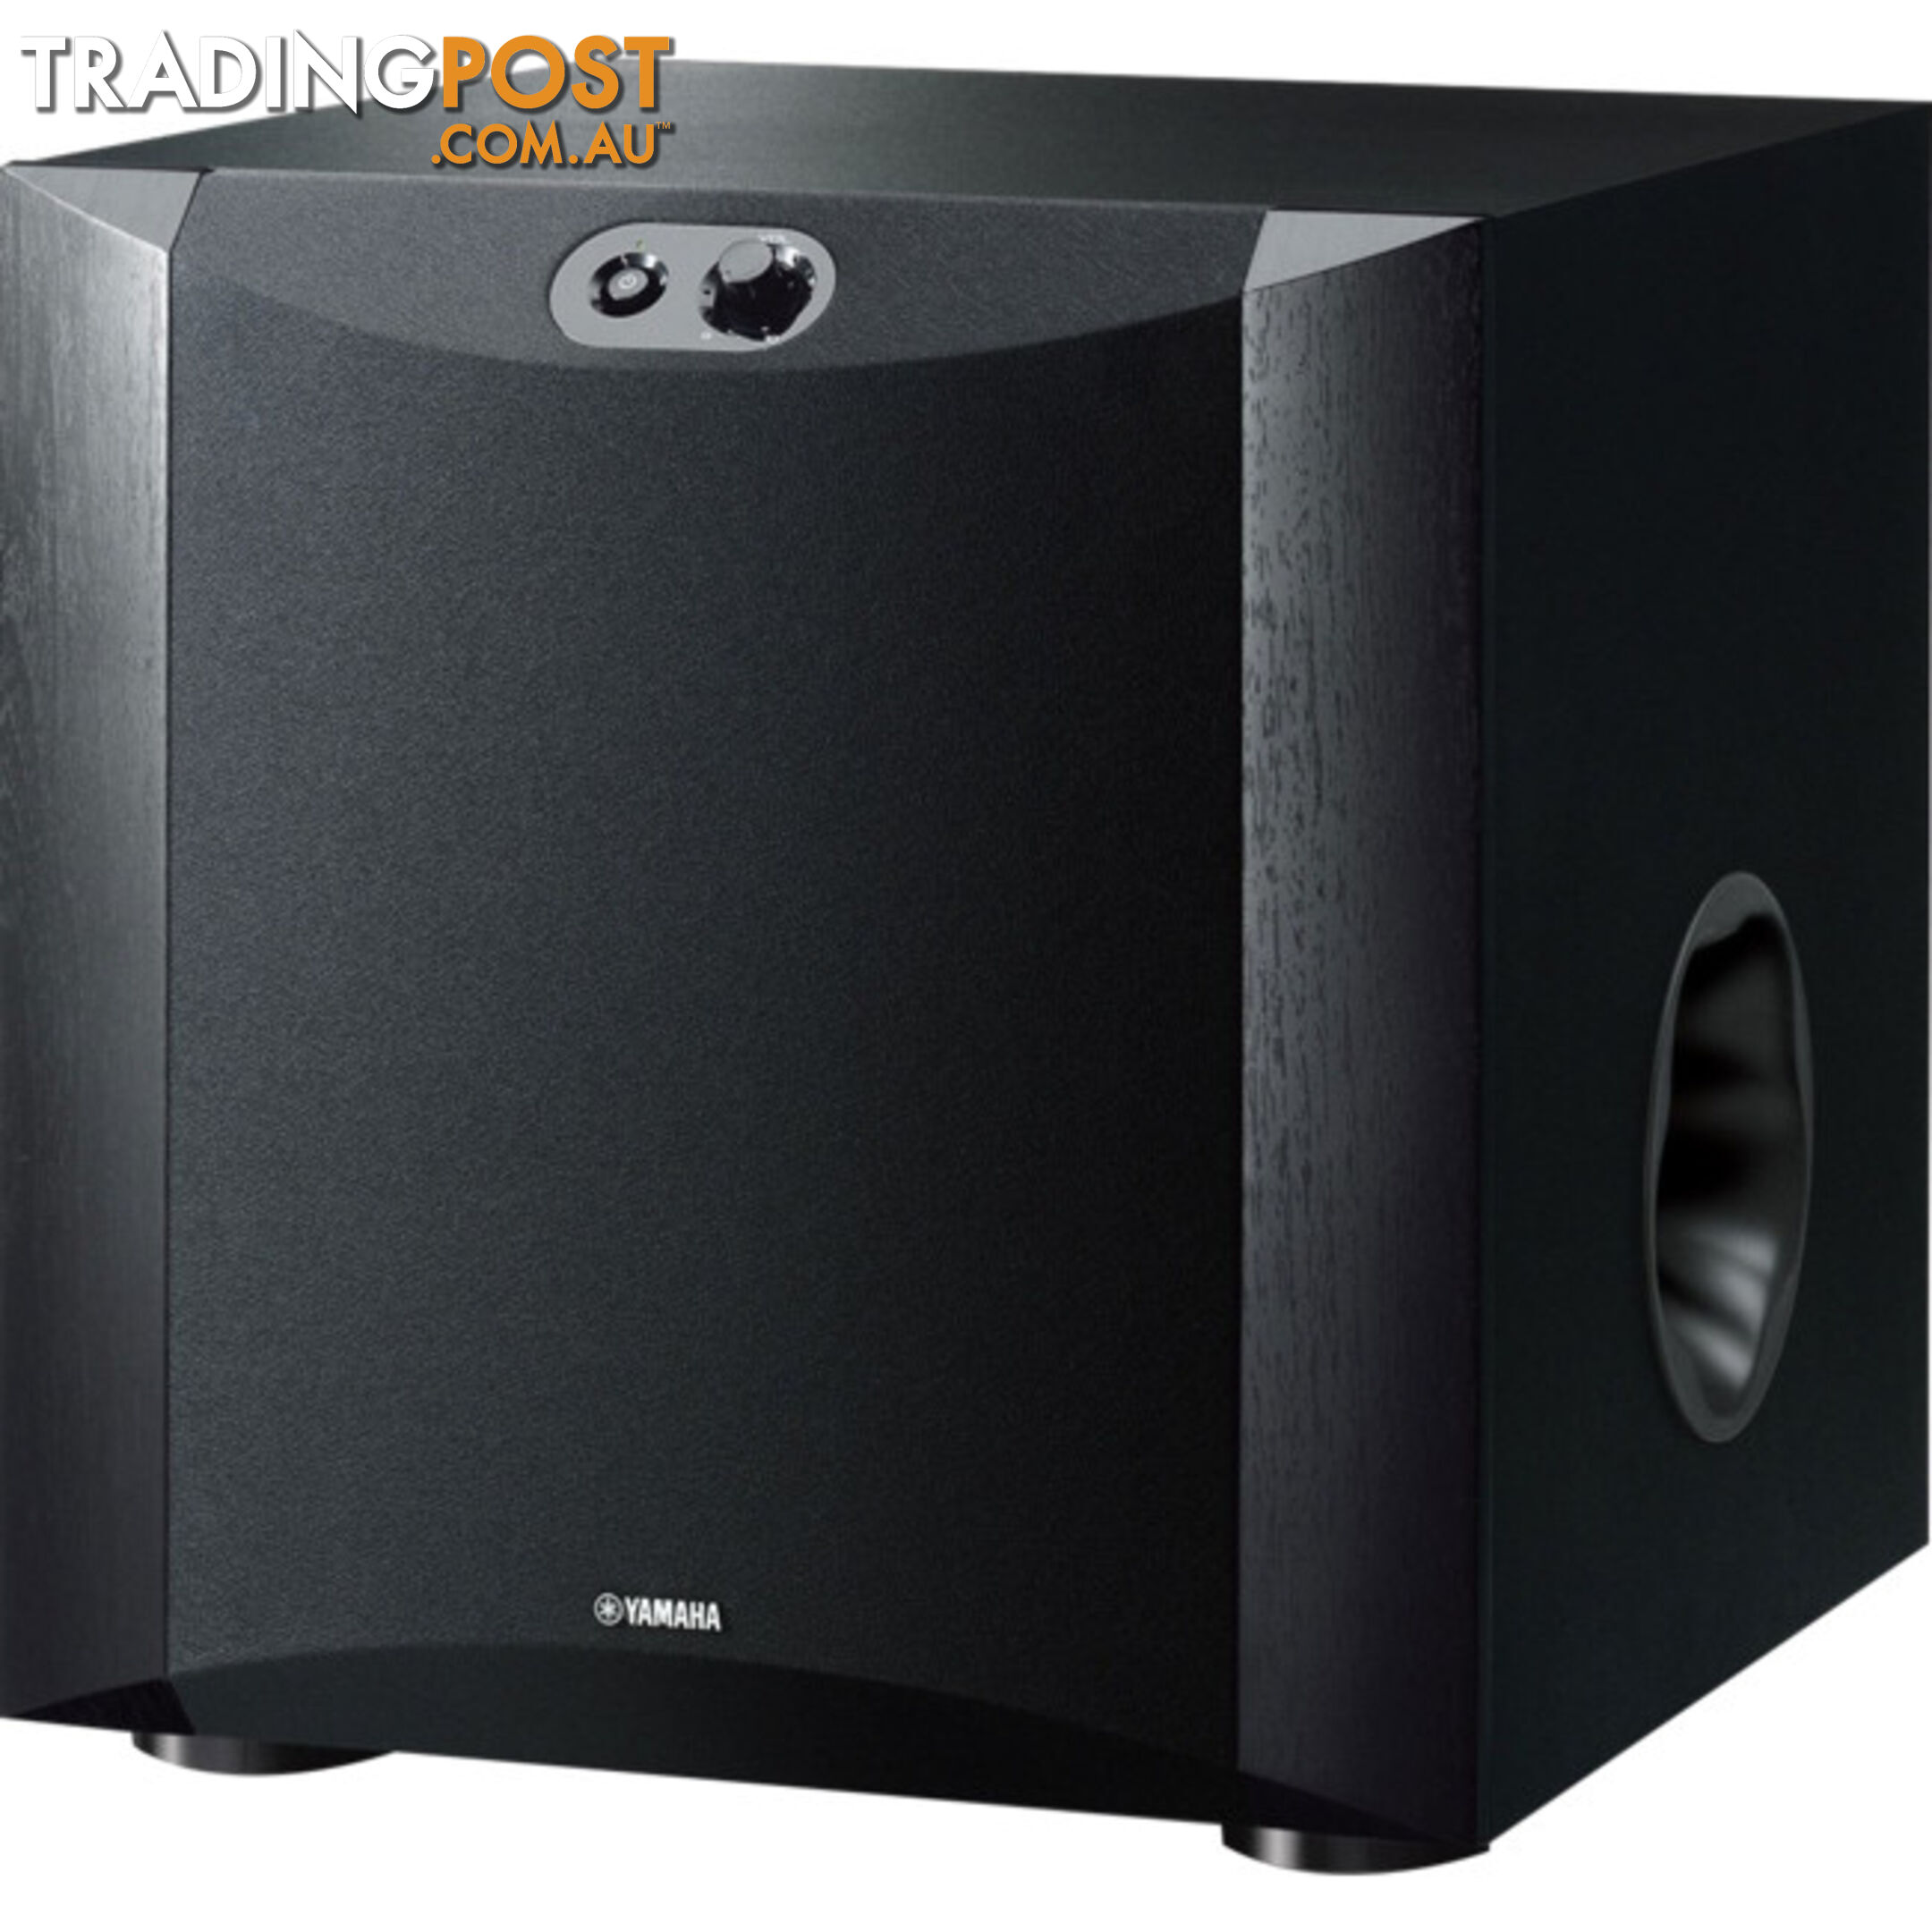 NSSW300B 10" 250W ACTIVE SUBWOOFER TWISTED FLARE - ADVANCED YST